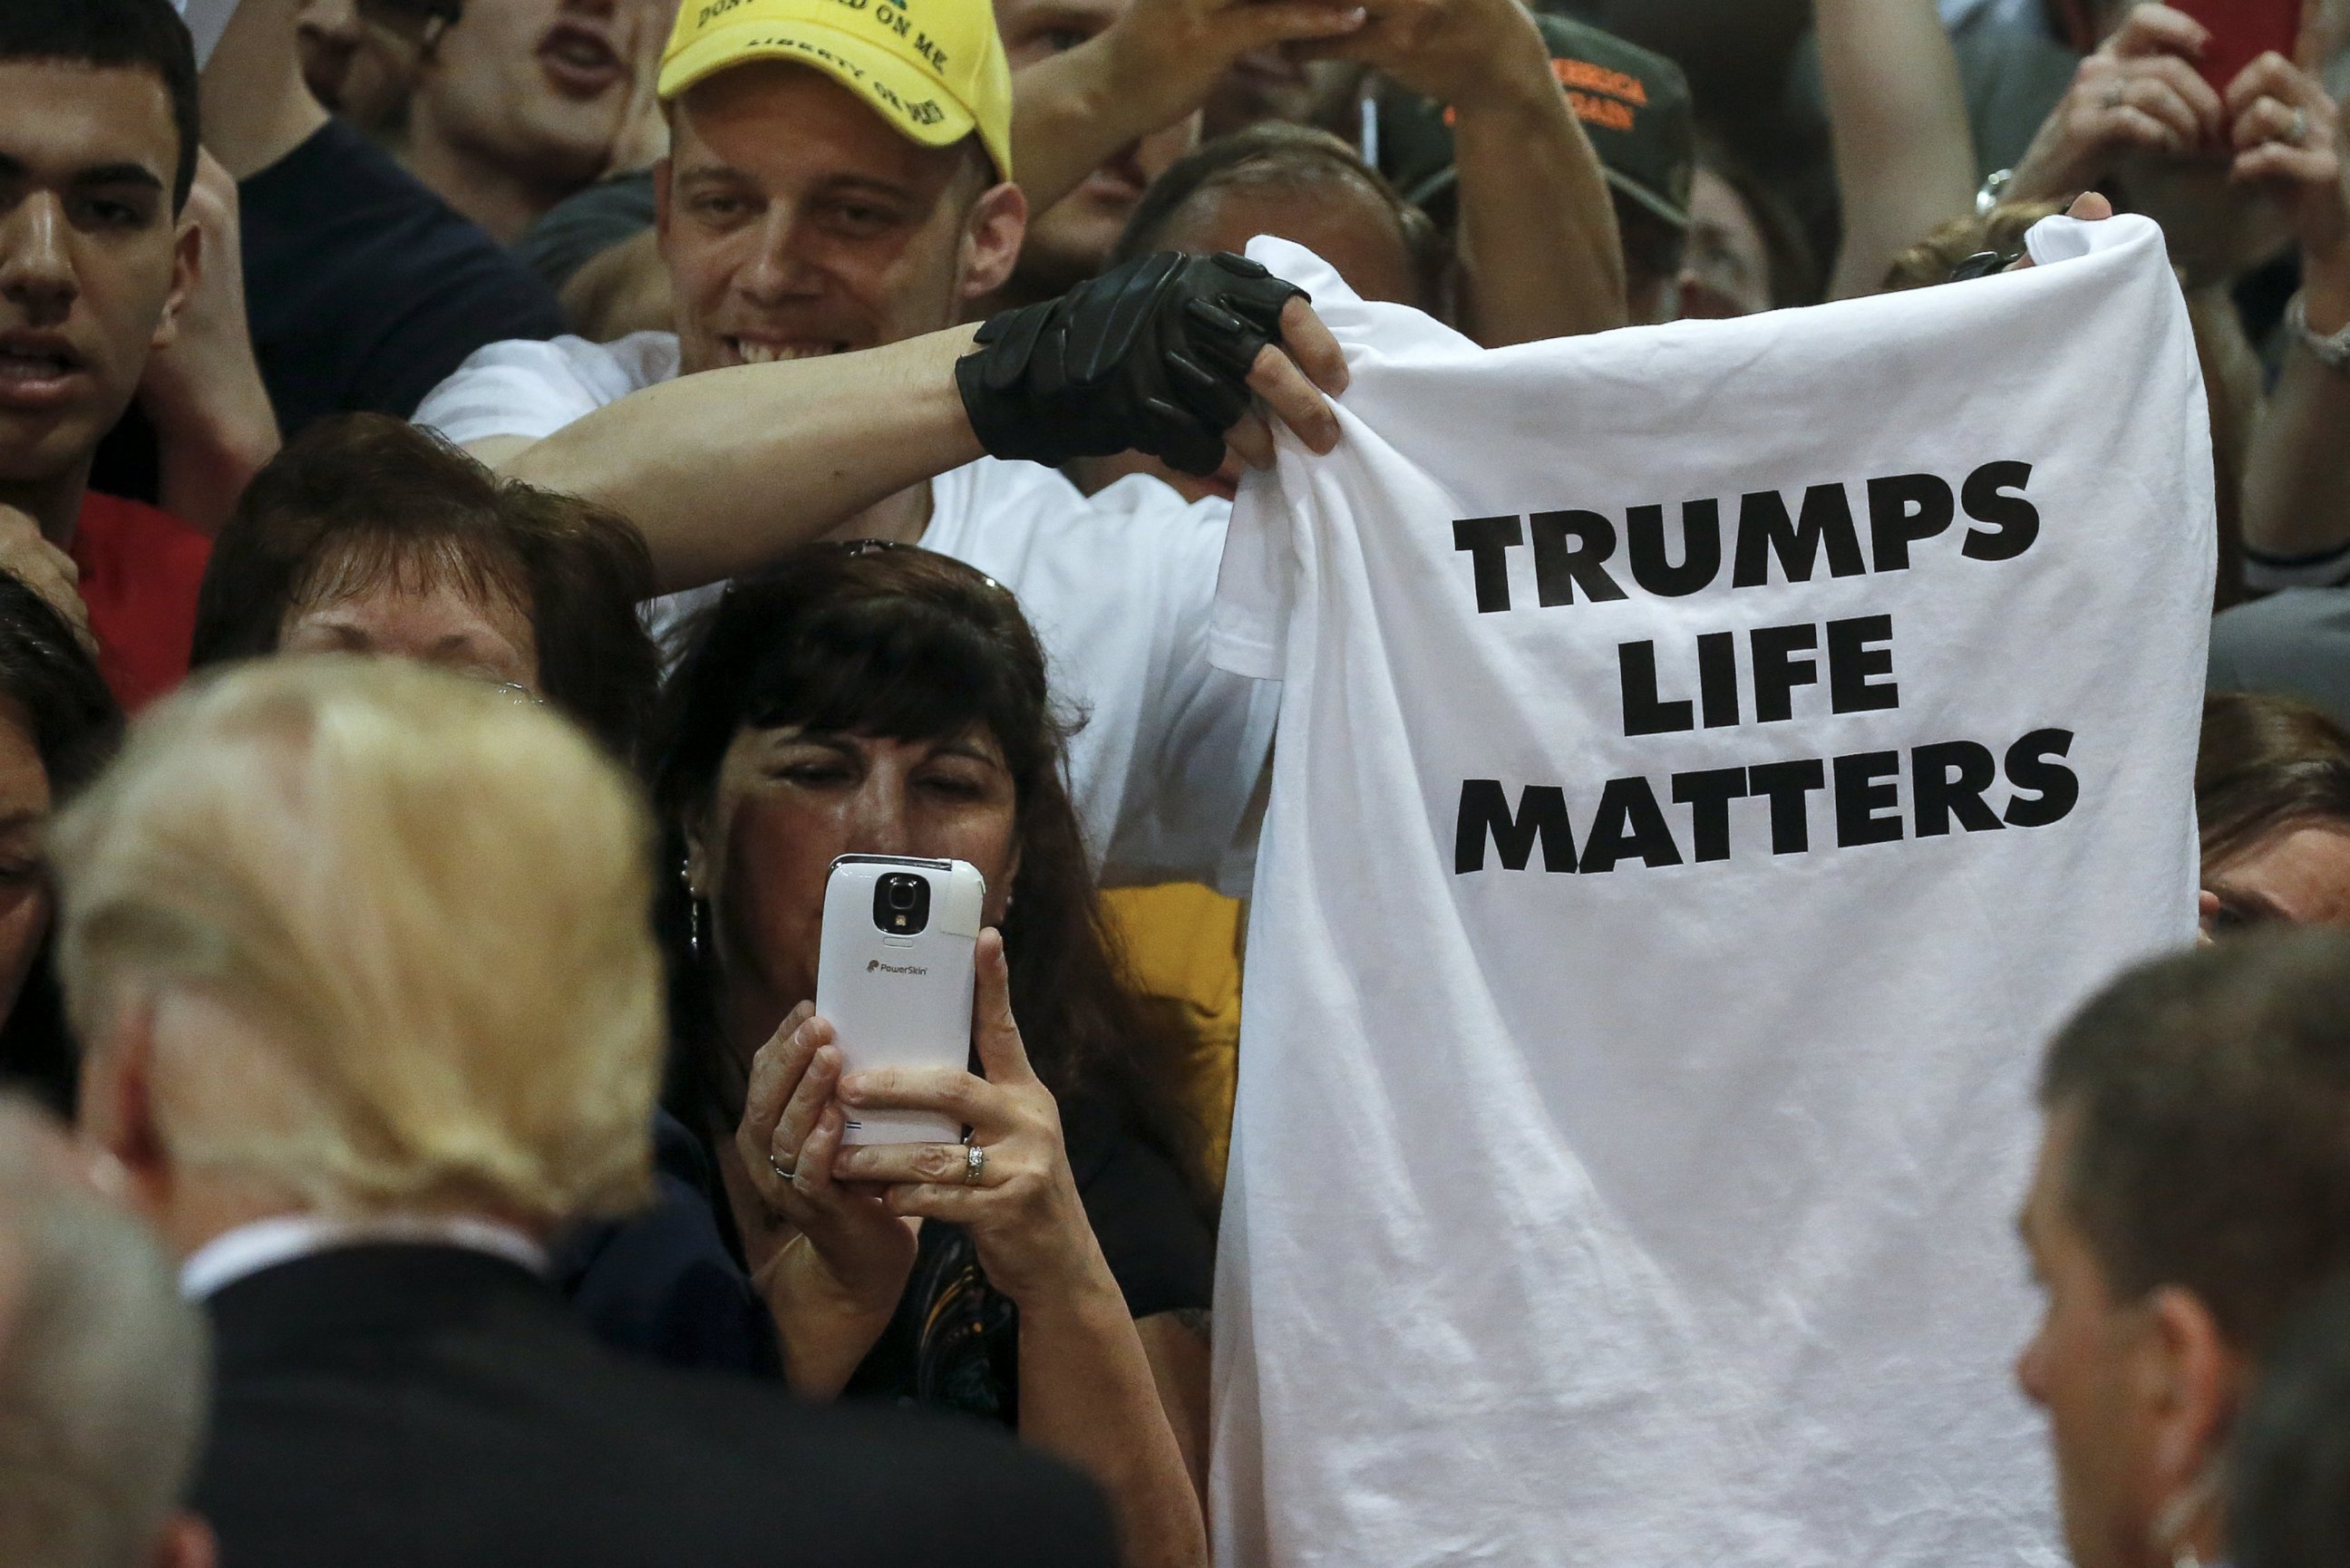 PHOTO: A man holds up a "Trumps Life Matters" t-shirt following a U.S. Republican presidential candidate Donald Trump campaign rally in Syracuse, New York, April 16, 2016.